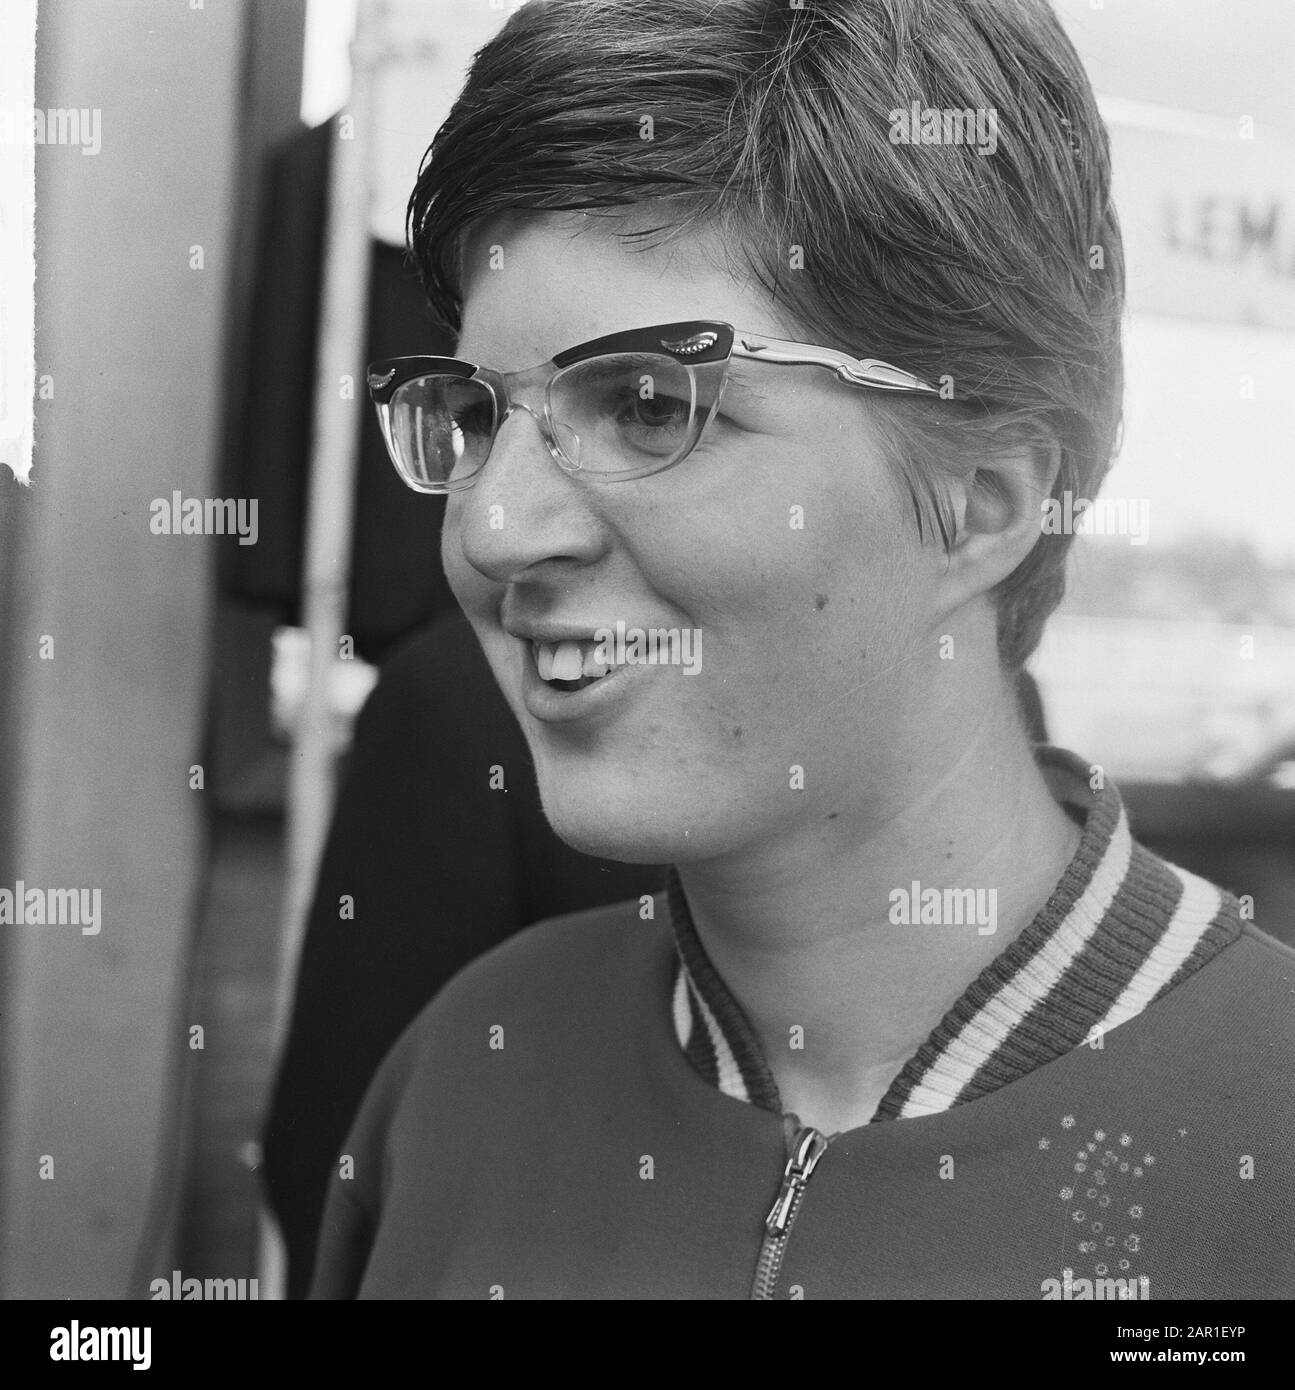 Swimming Championships at Emmen, Coby Buter champion Date: August 8, 1965 Location: Emmen Keywords: HEADS, Championships, swimmers Stock Photo